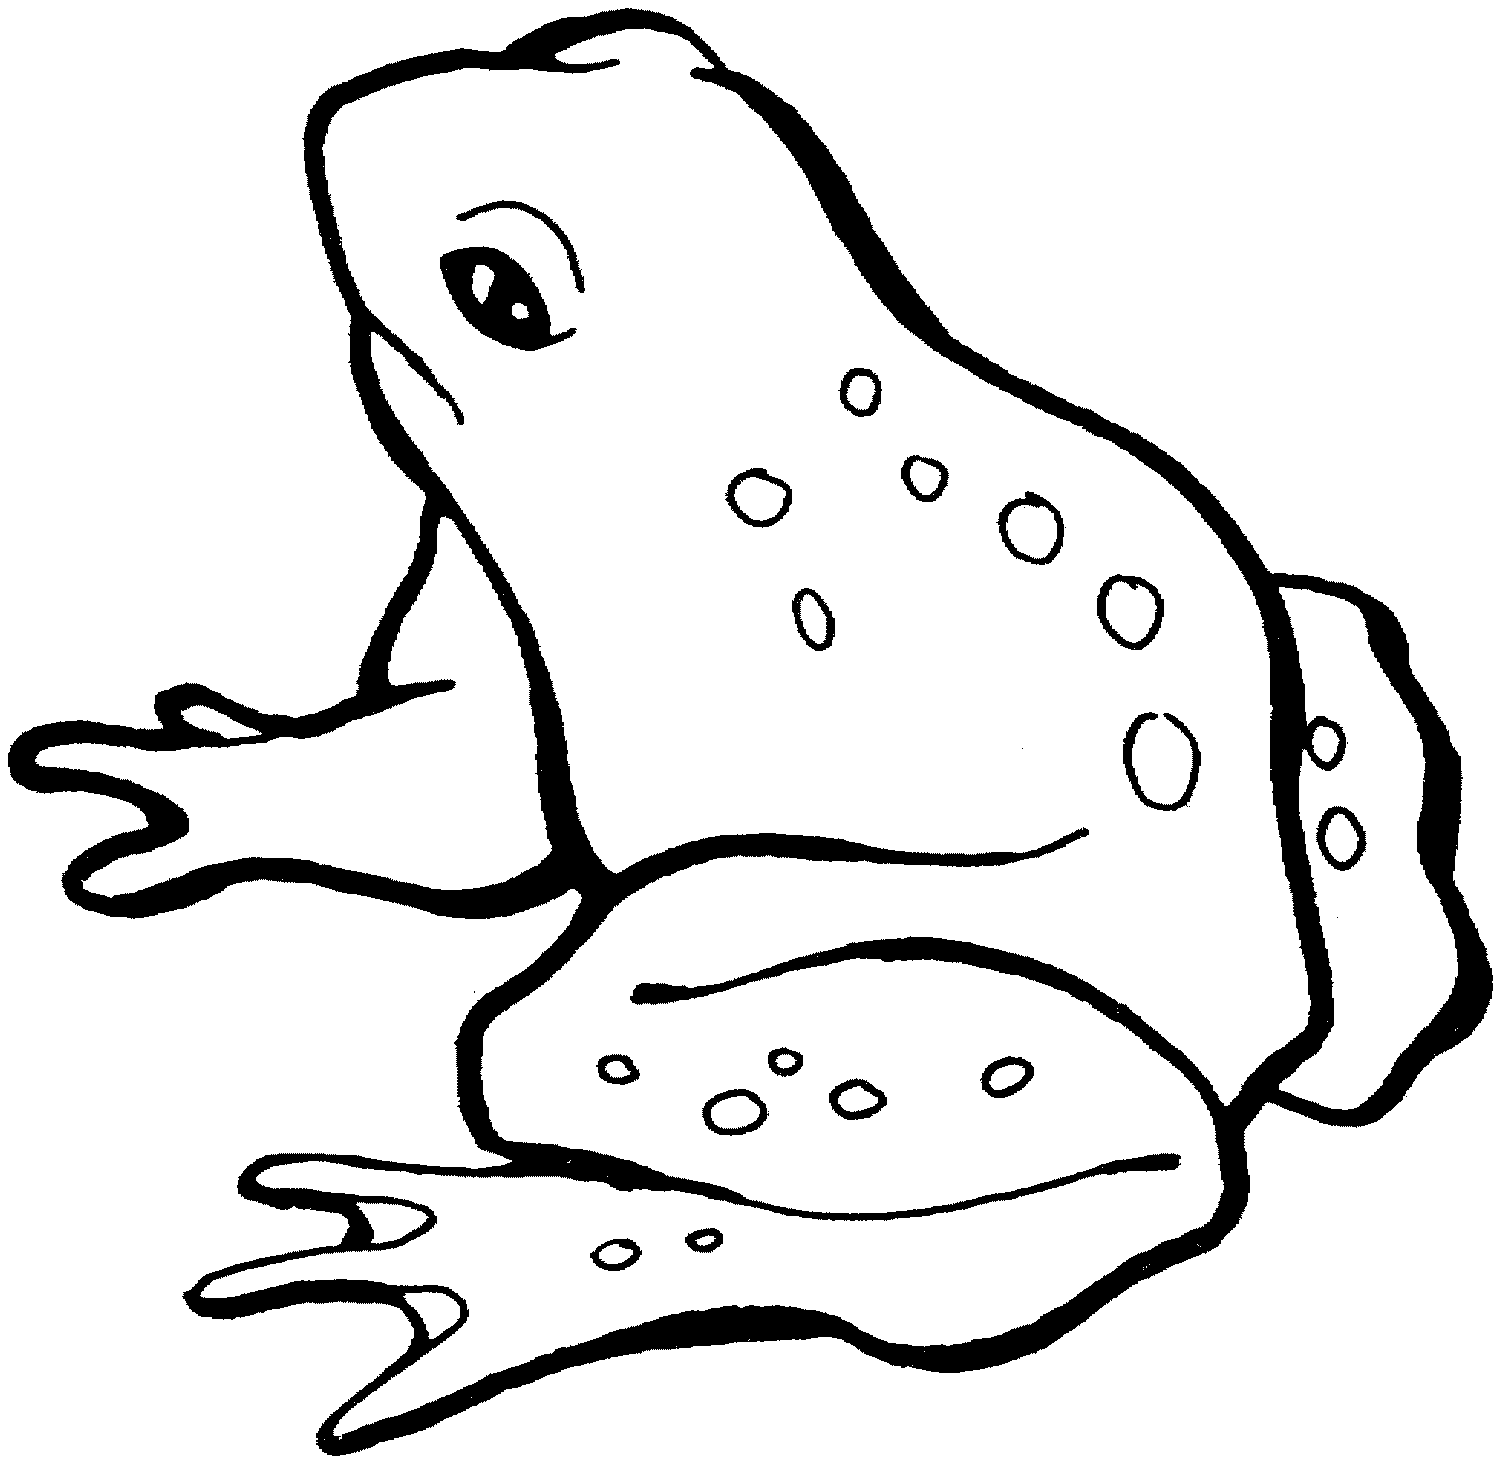 amphibian coloring pages beautiful coloring pages of frogs free for all animal vista pages coloring amphibian 